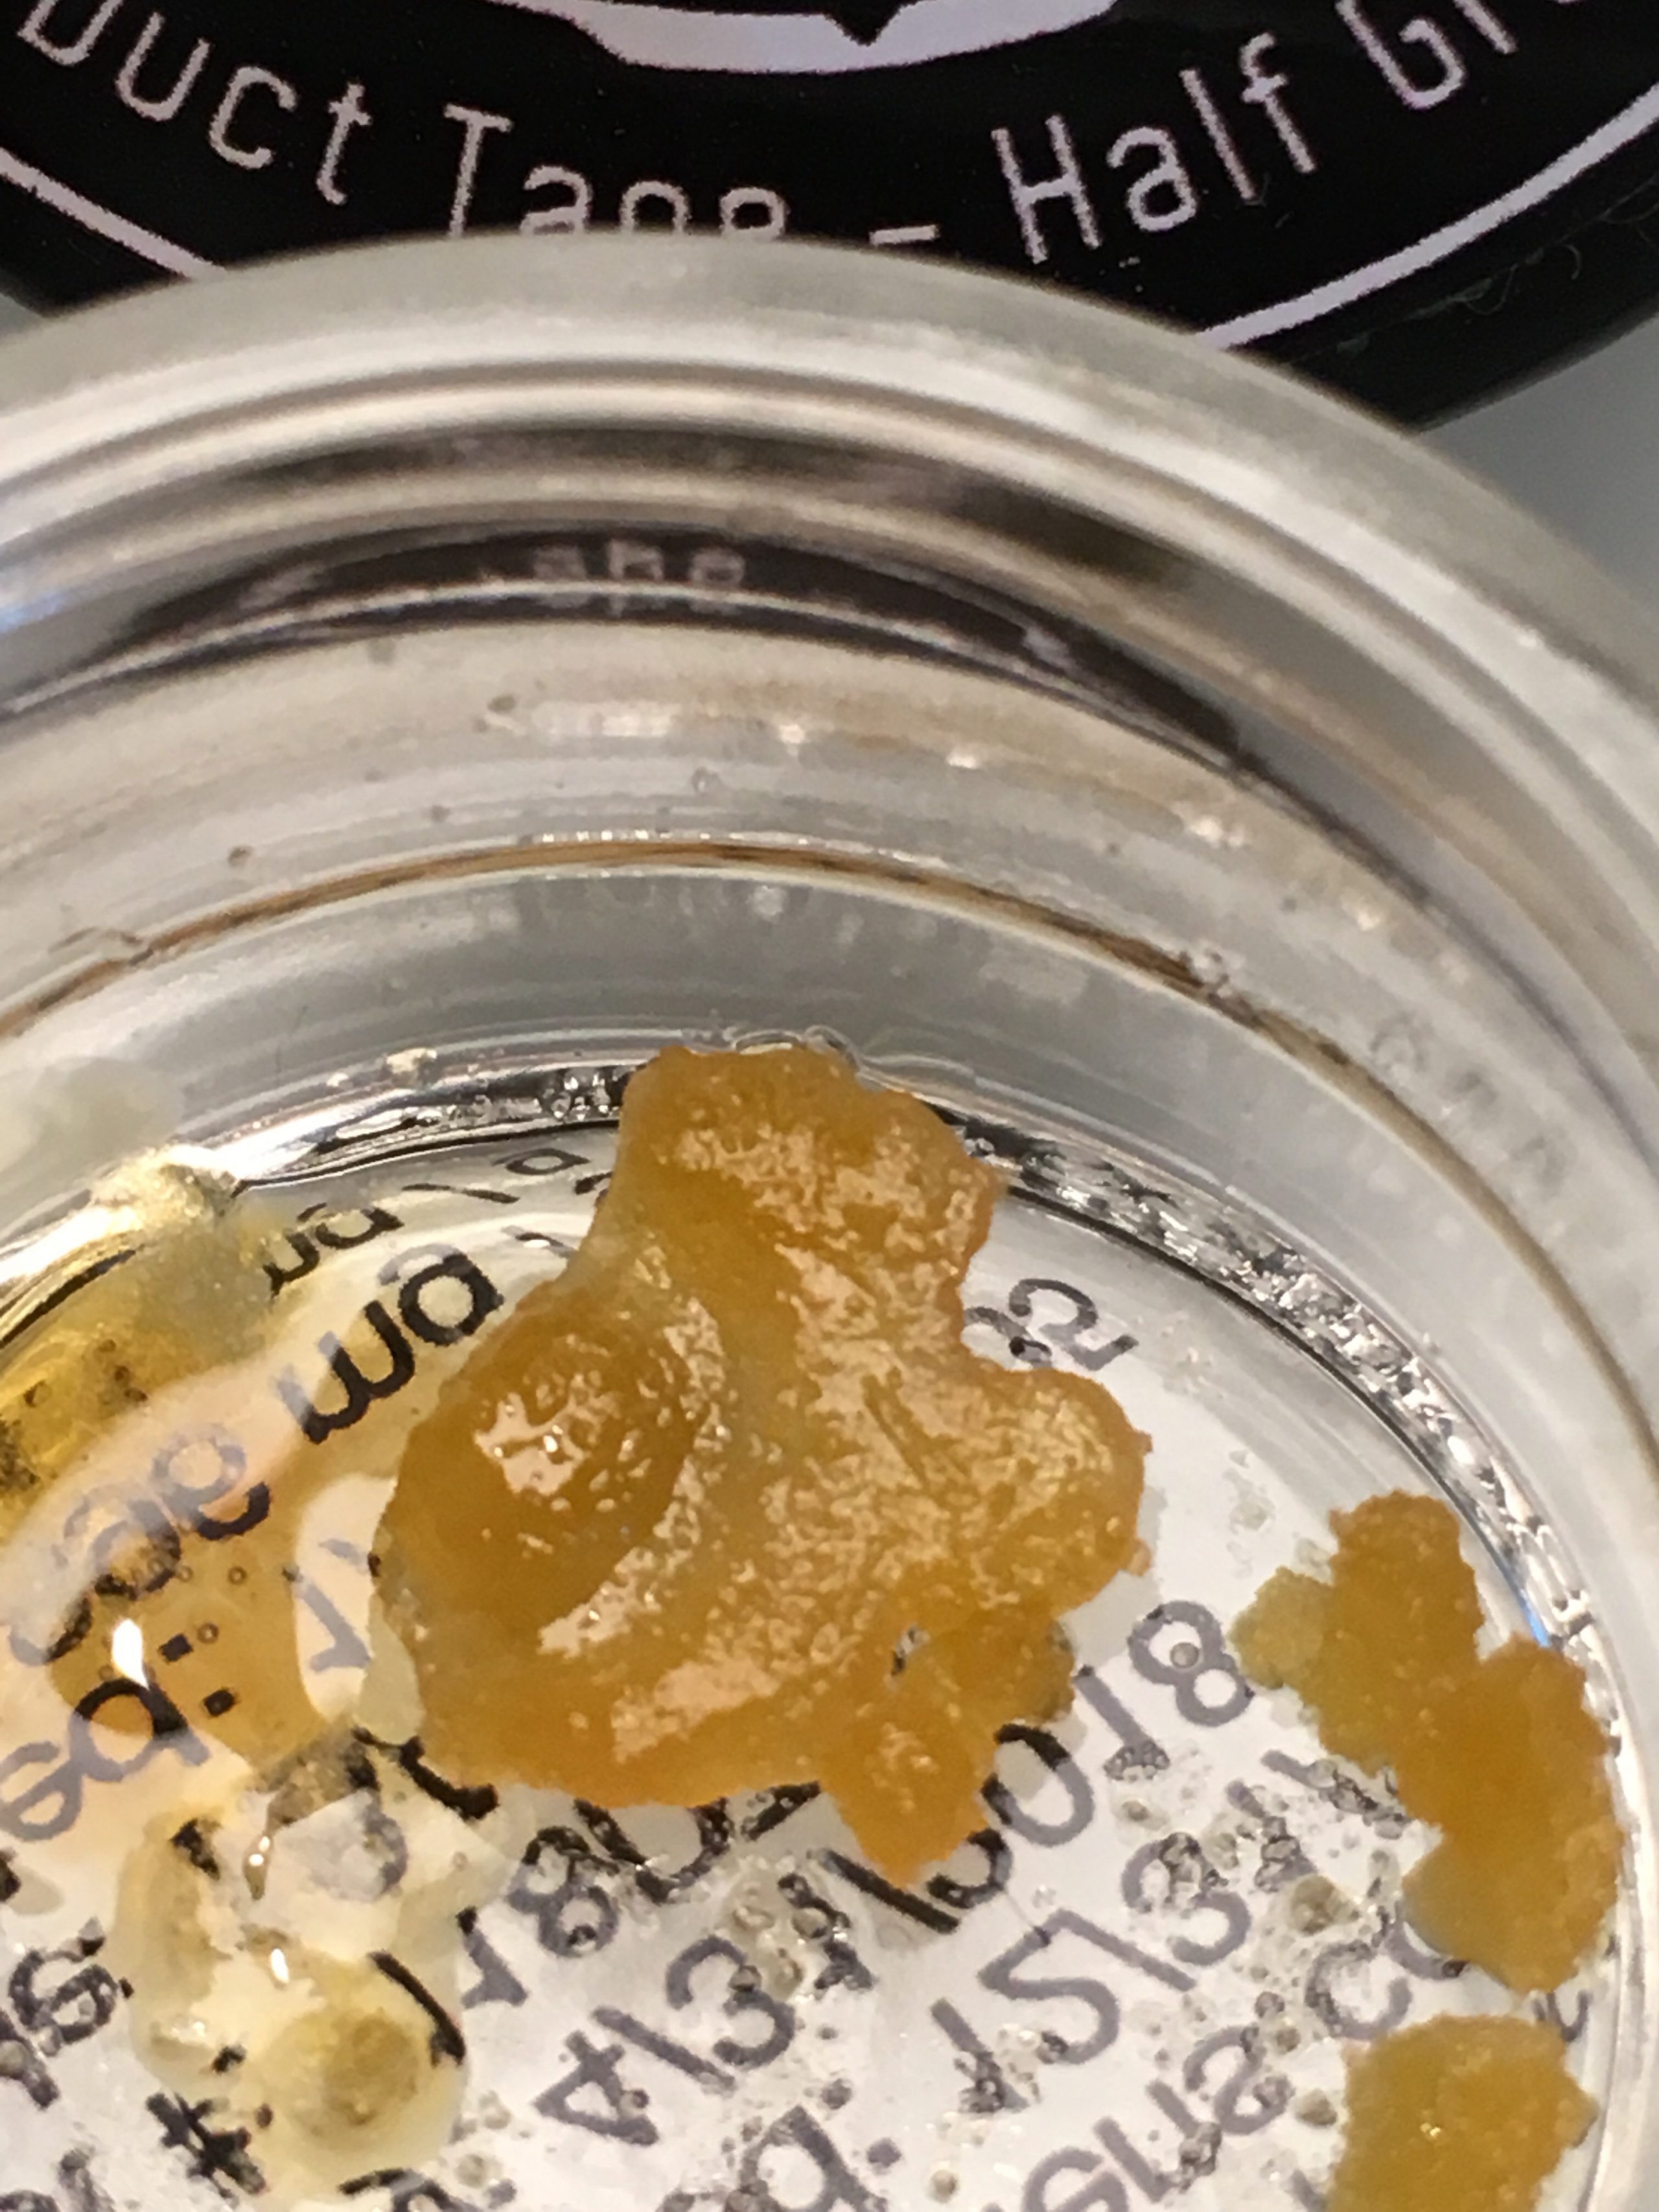 Cream of the Crop live resin close up